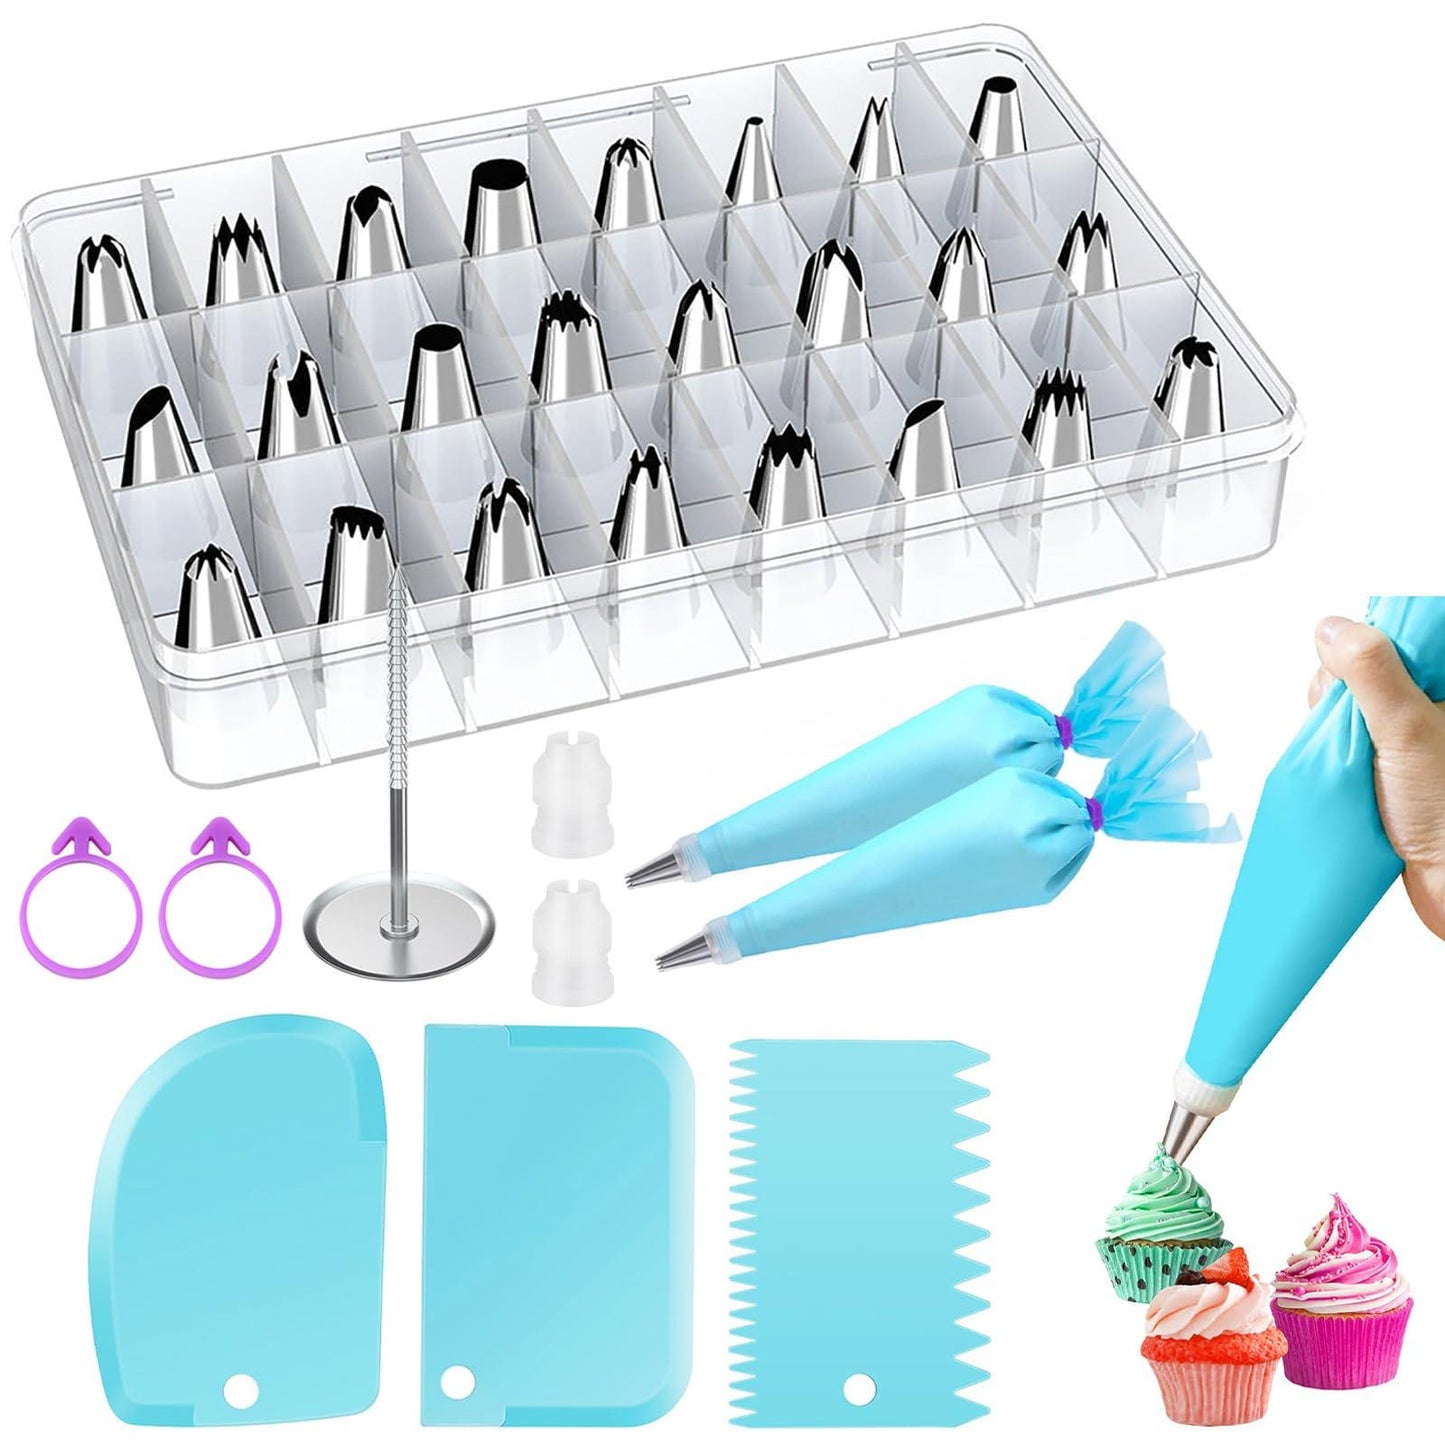 Suuker Piping Bags and Tips Set, Reusable Icing Bags and Tips with 24 Piping Tips, 2 Reusable Pastry Bags, 2 Couplers, 3 Cake Scraper, Cake Decorating Kit for Frosting Cookie, Cupcake(34 Pcs) - CookCave